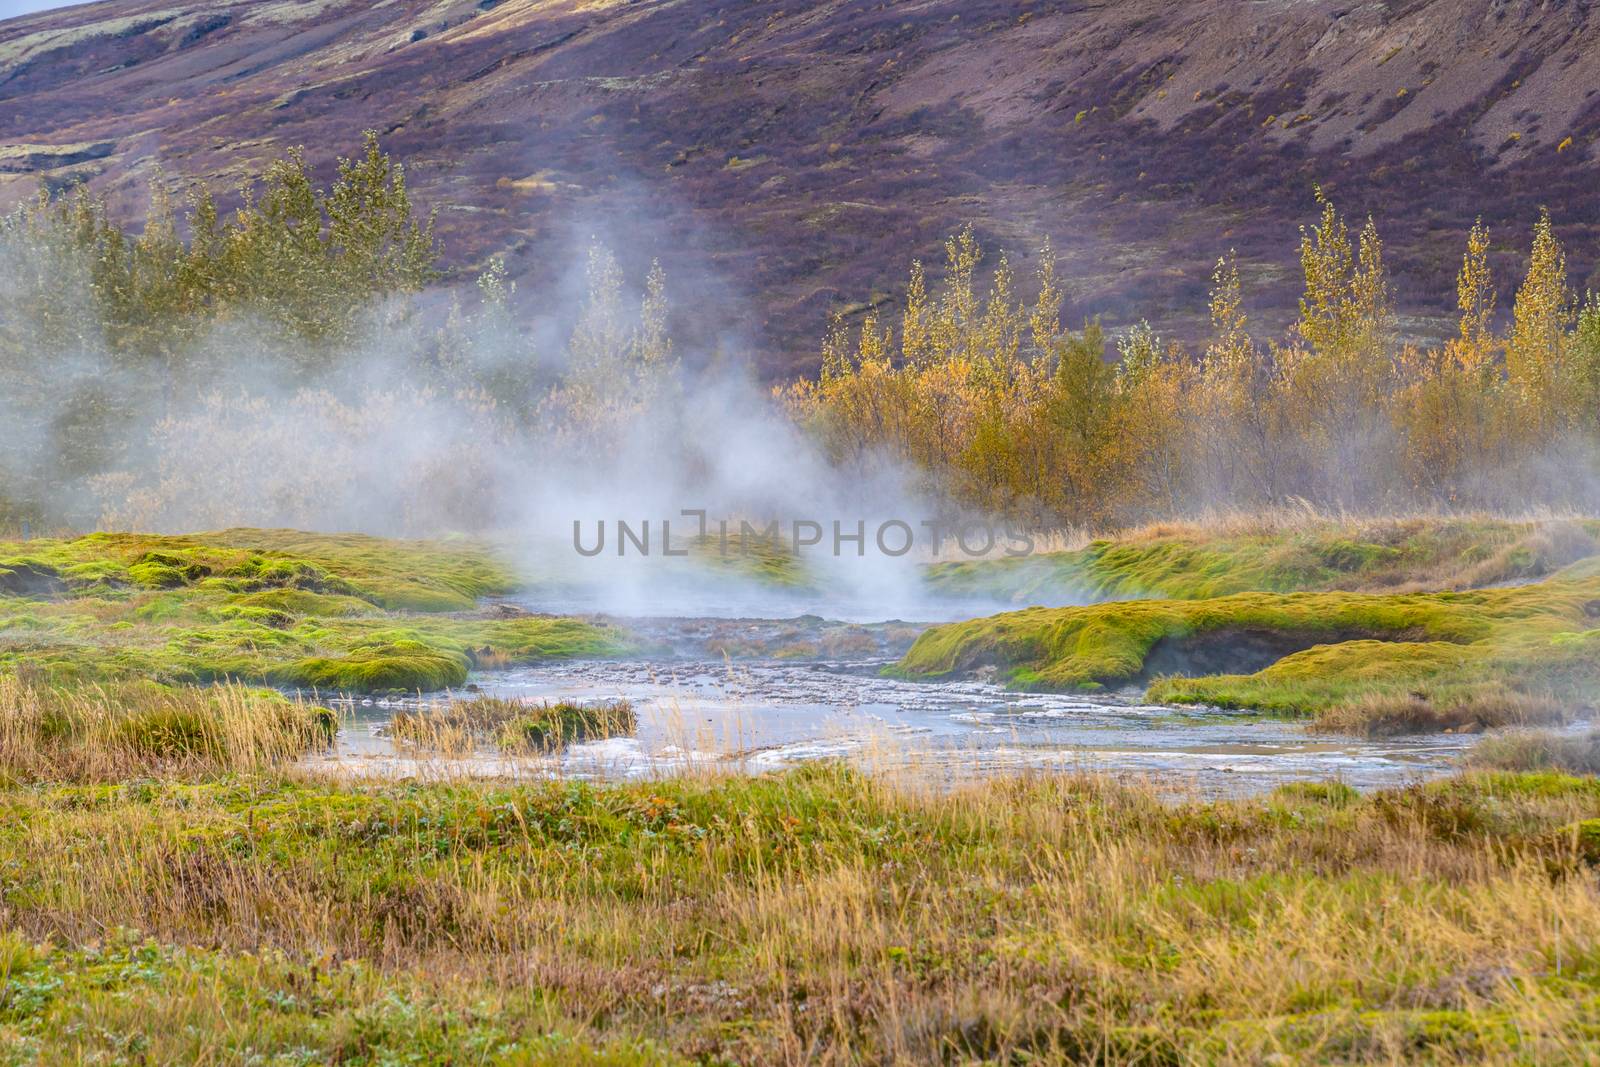 Geysir Golden Circle in Iceland geothermal hot springs muddy hot landscape by MXW_Stock